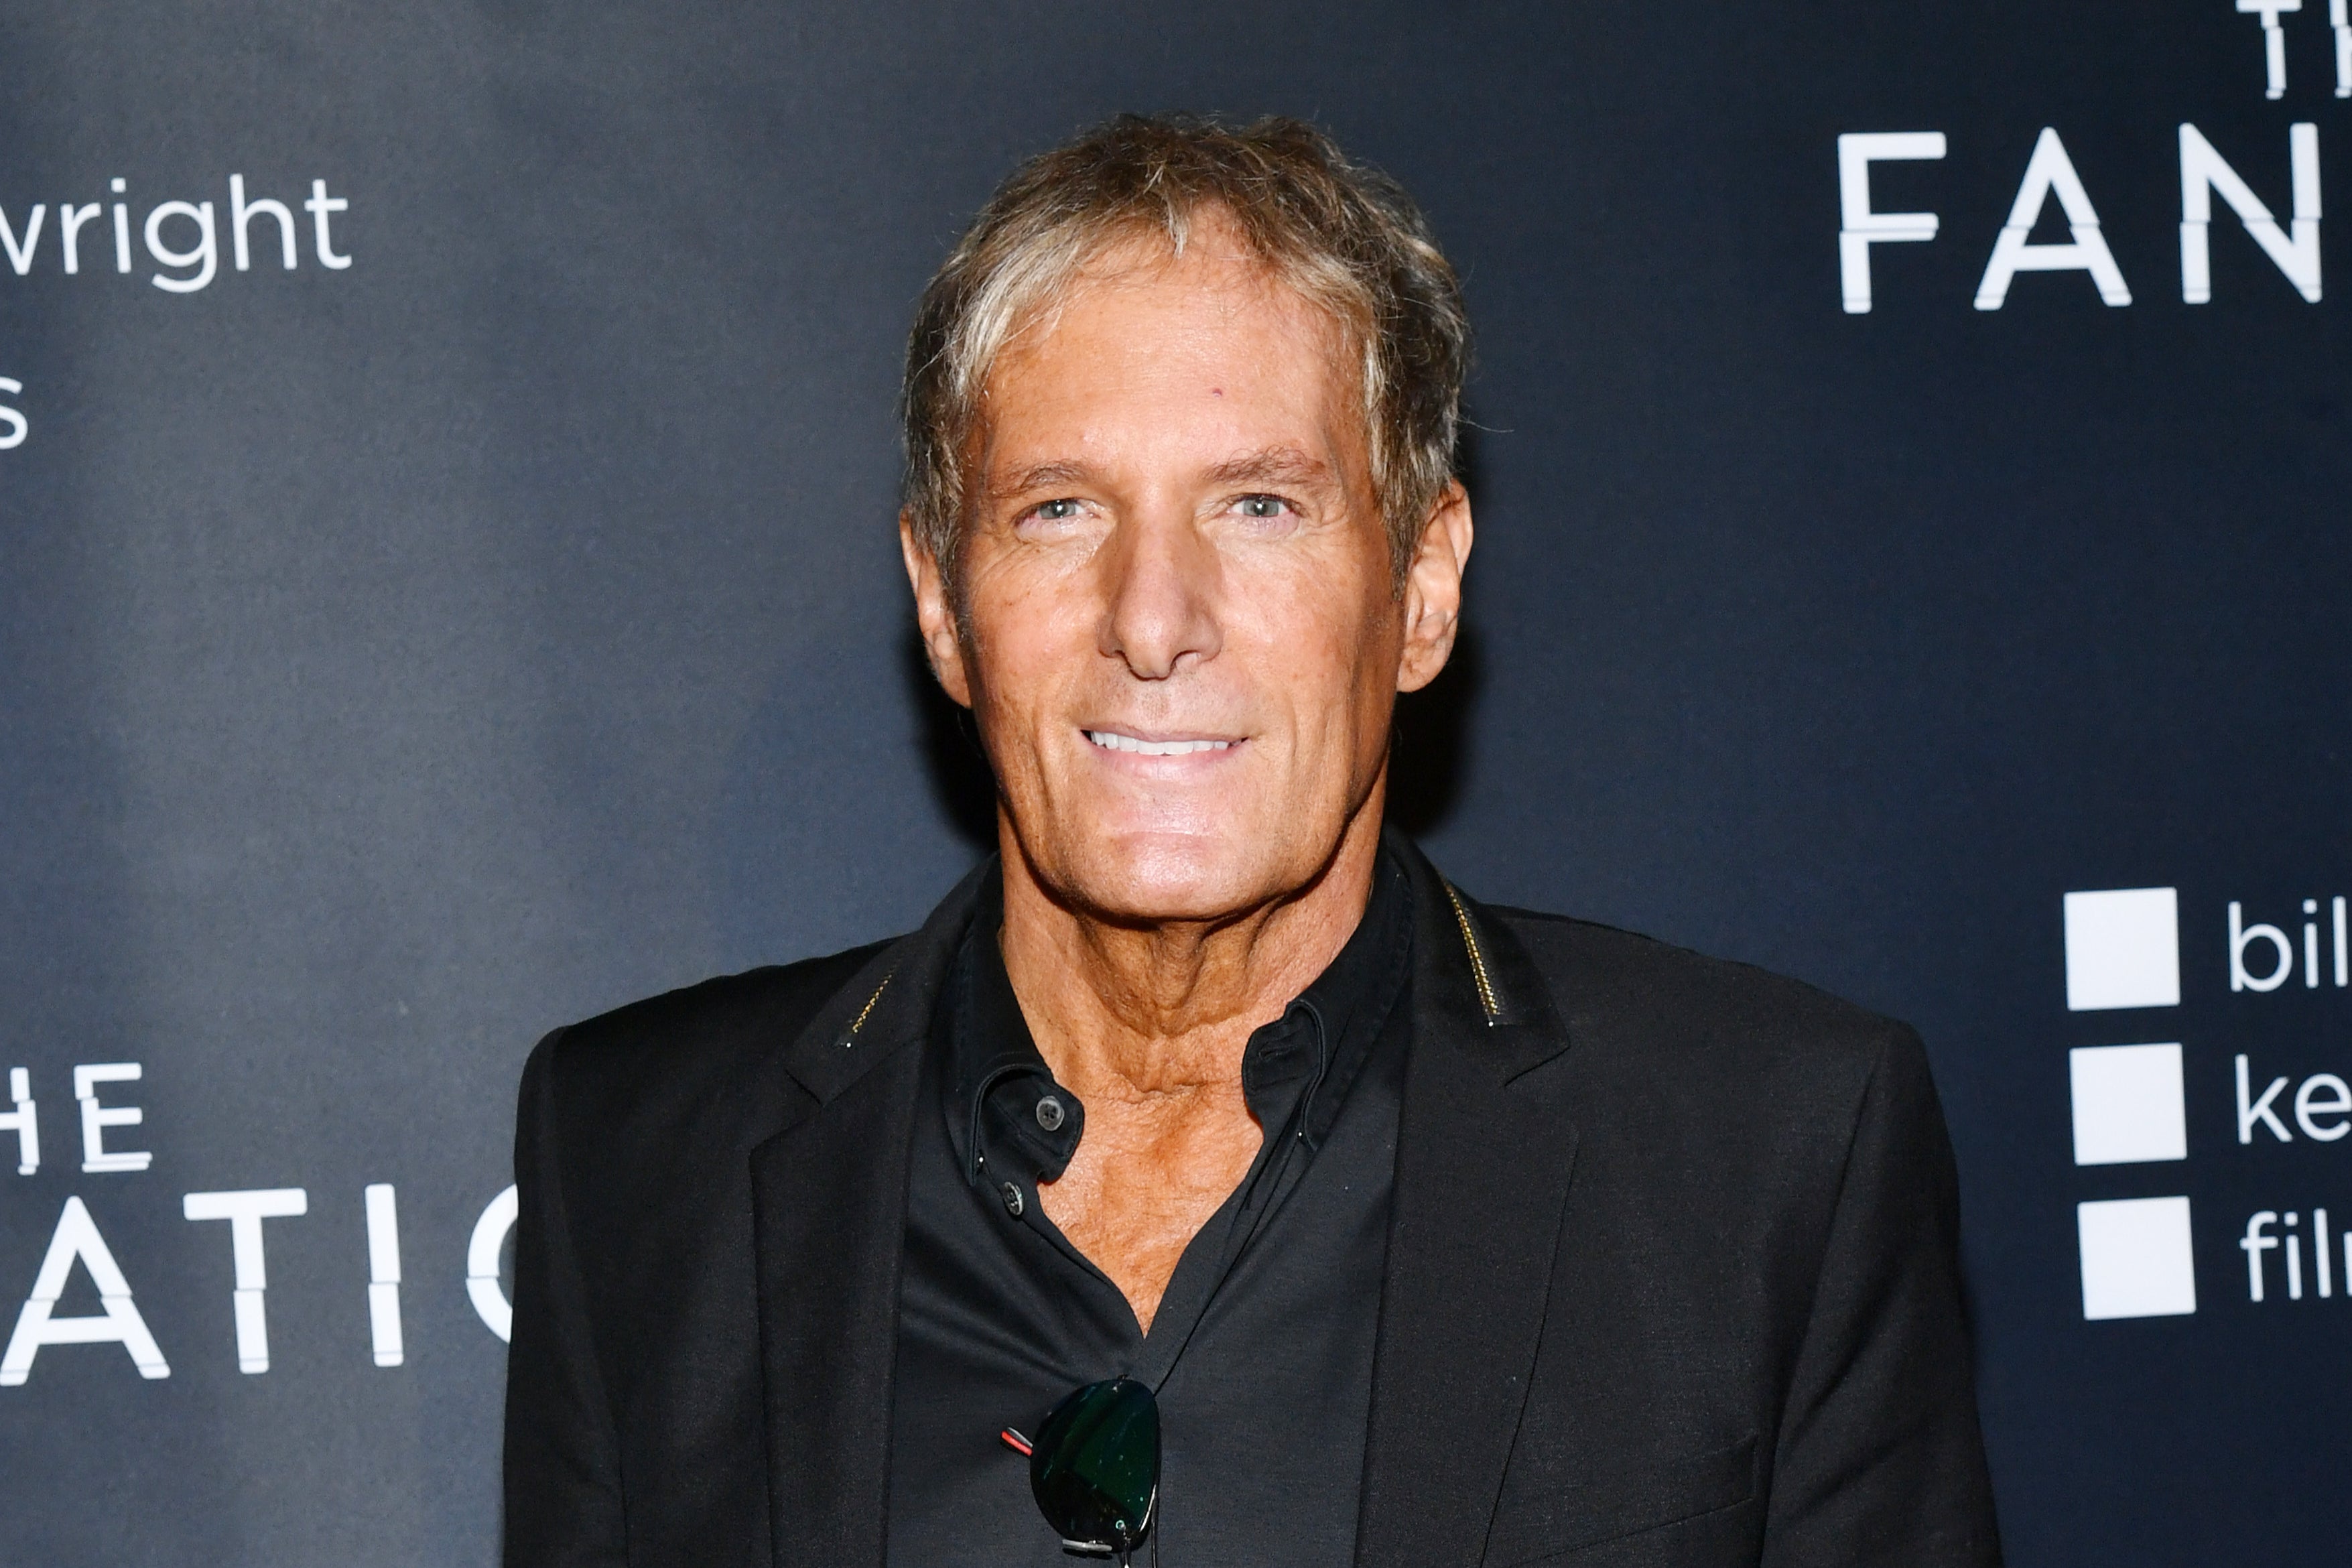 Michael Bolton in Hollywood in 2019